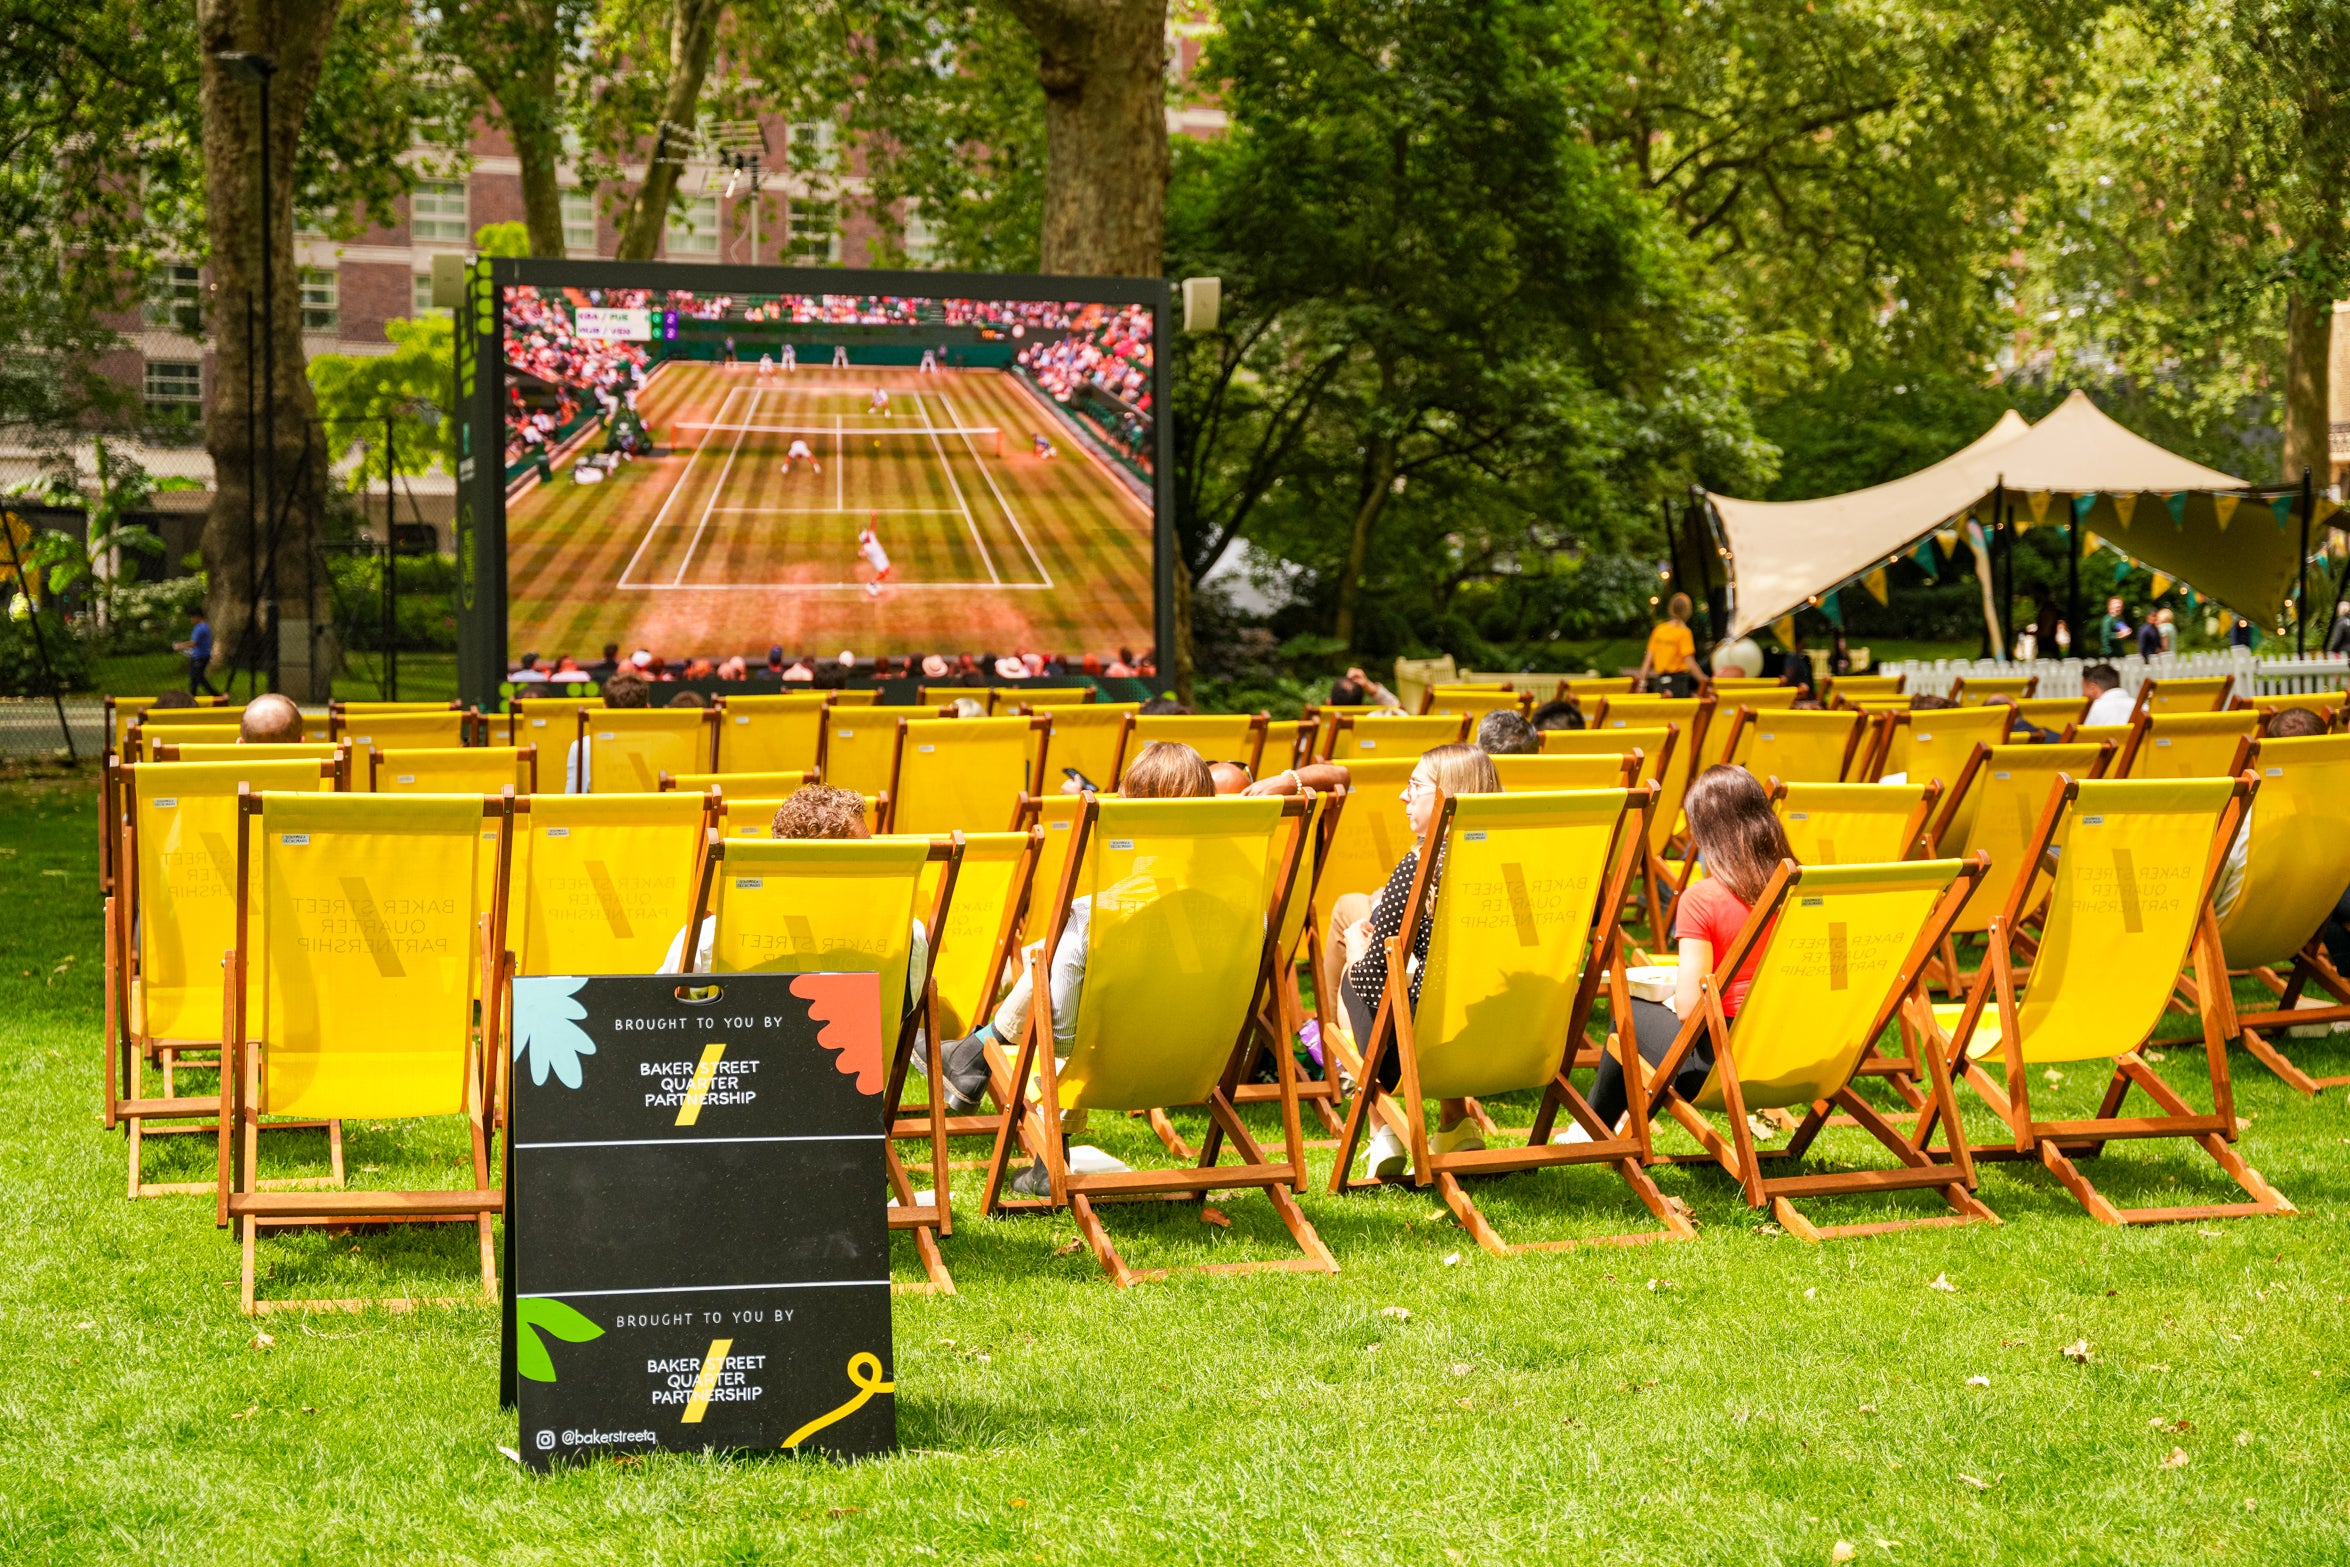 It’s the 10th year of Summer in the Square at Portman Square Gardens